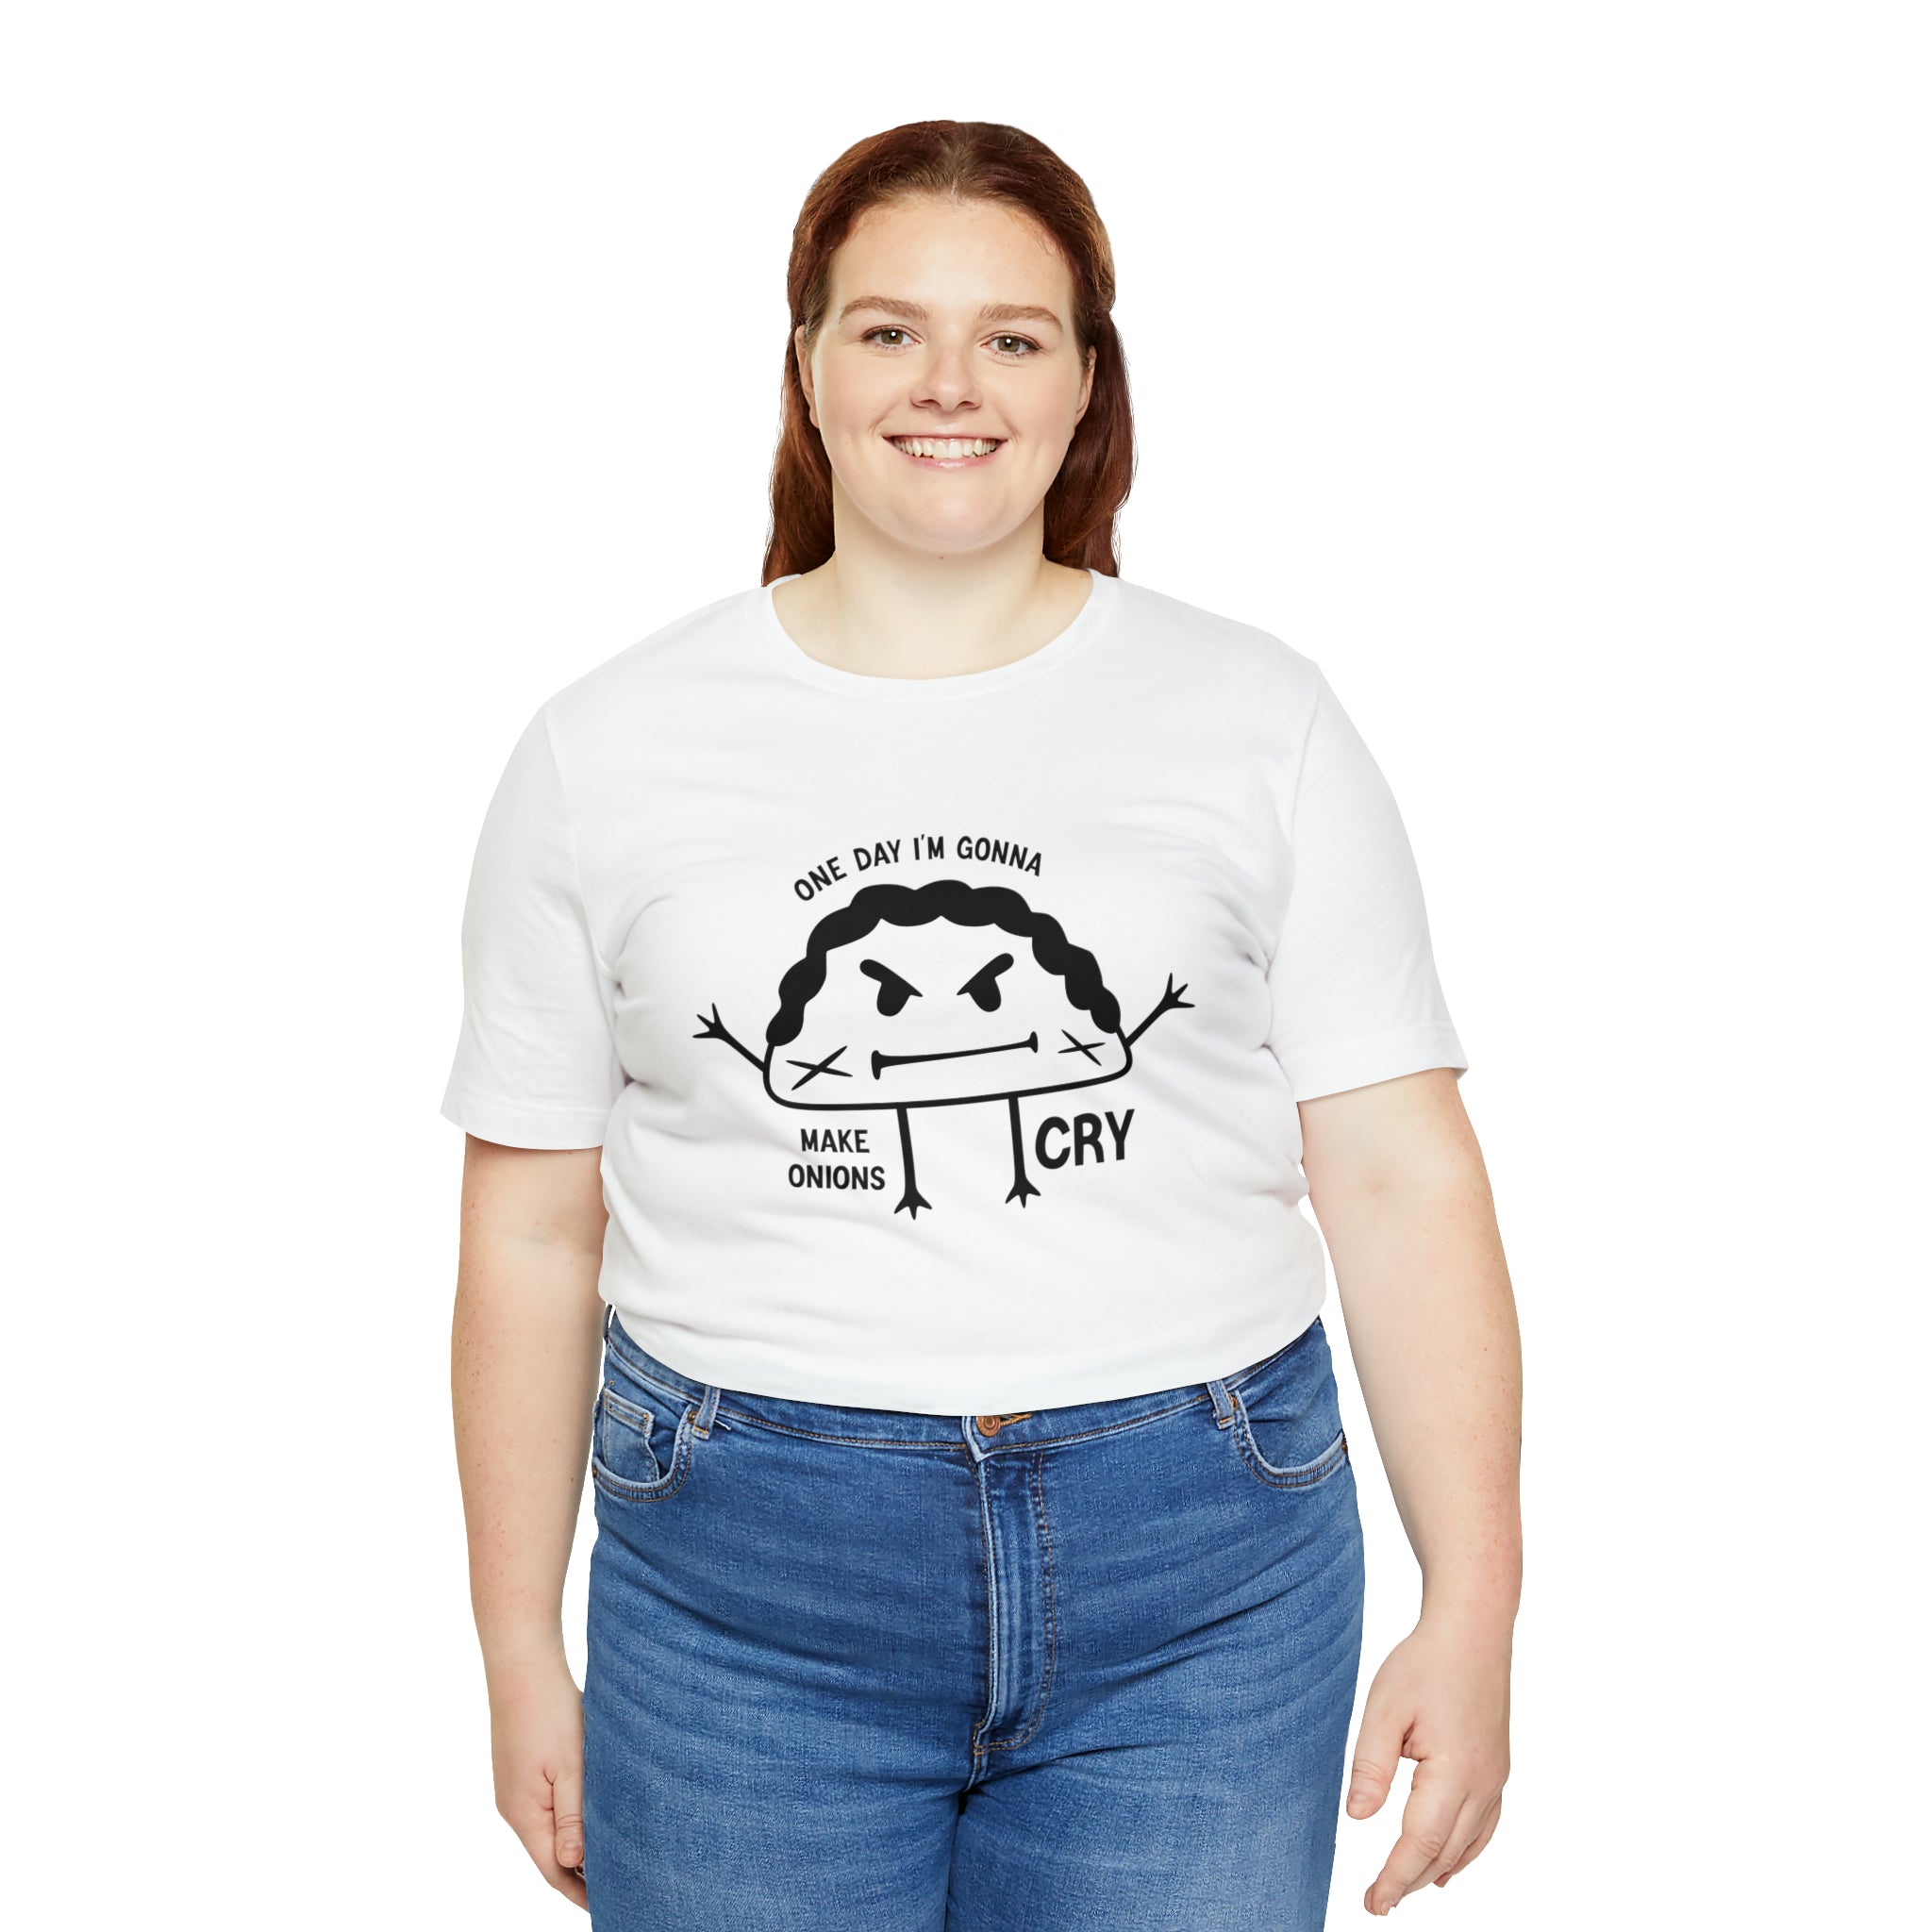 A woman wearing a unique white One Day Im Gonna Make Onions Cry t-shirt with an image of a pizza.